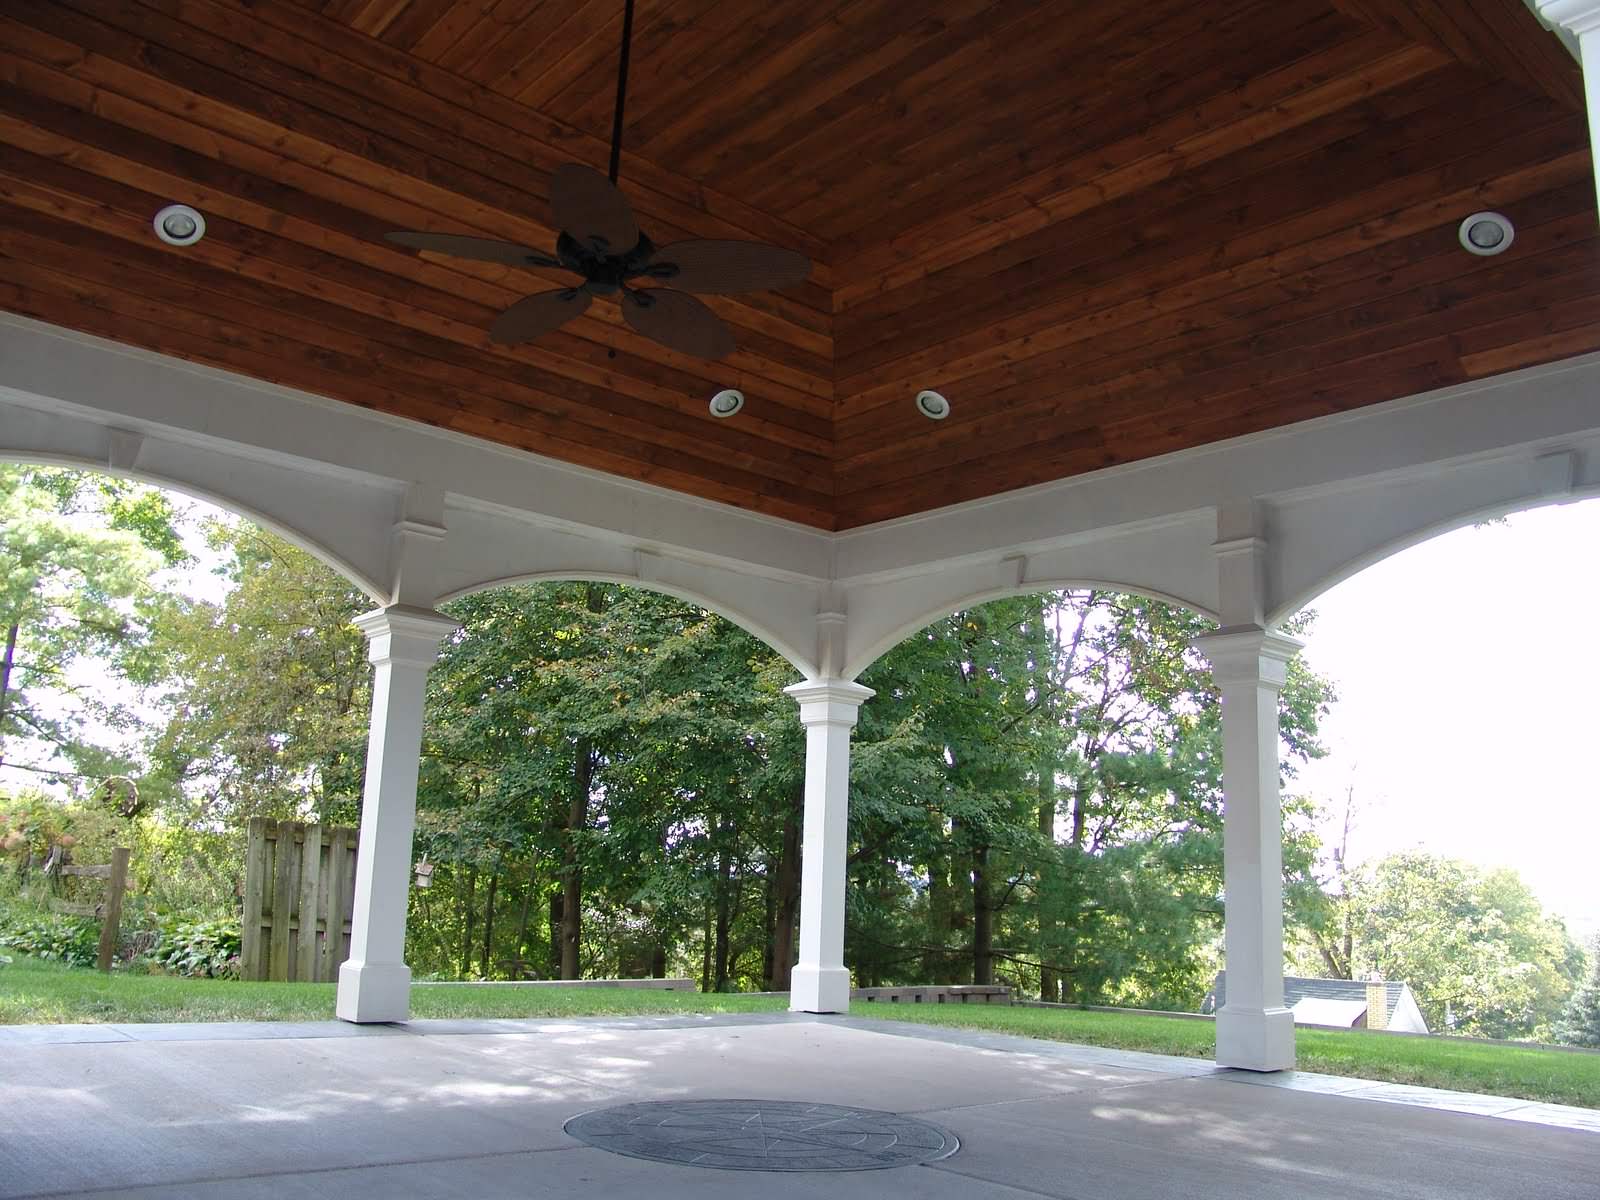 Vaulted covered patio